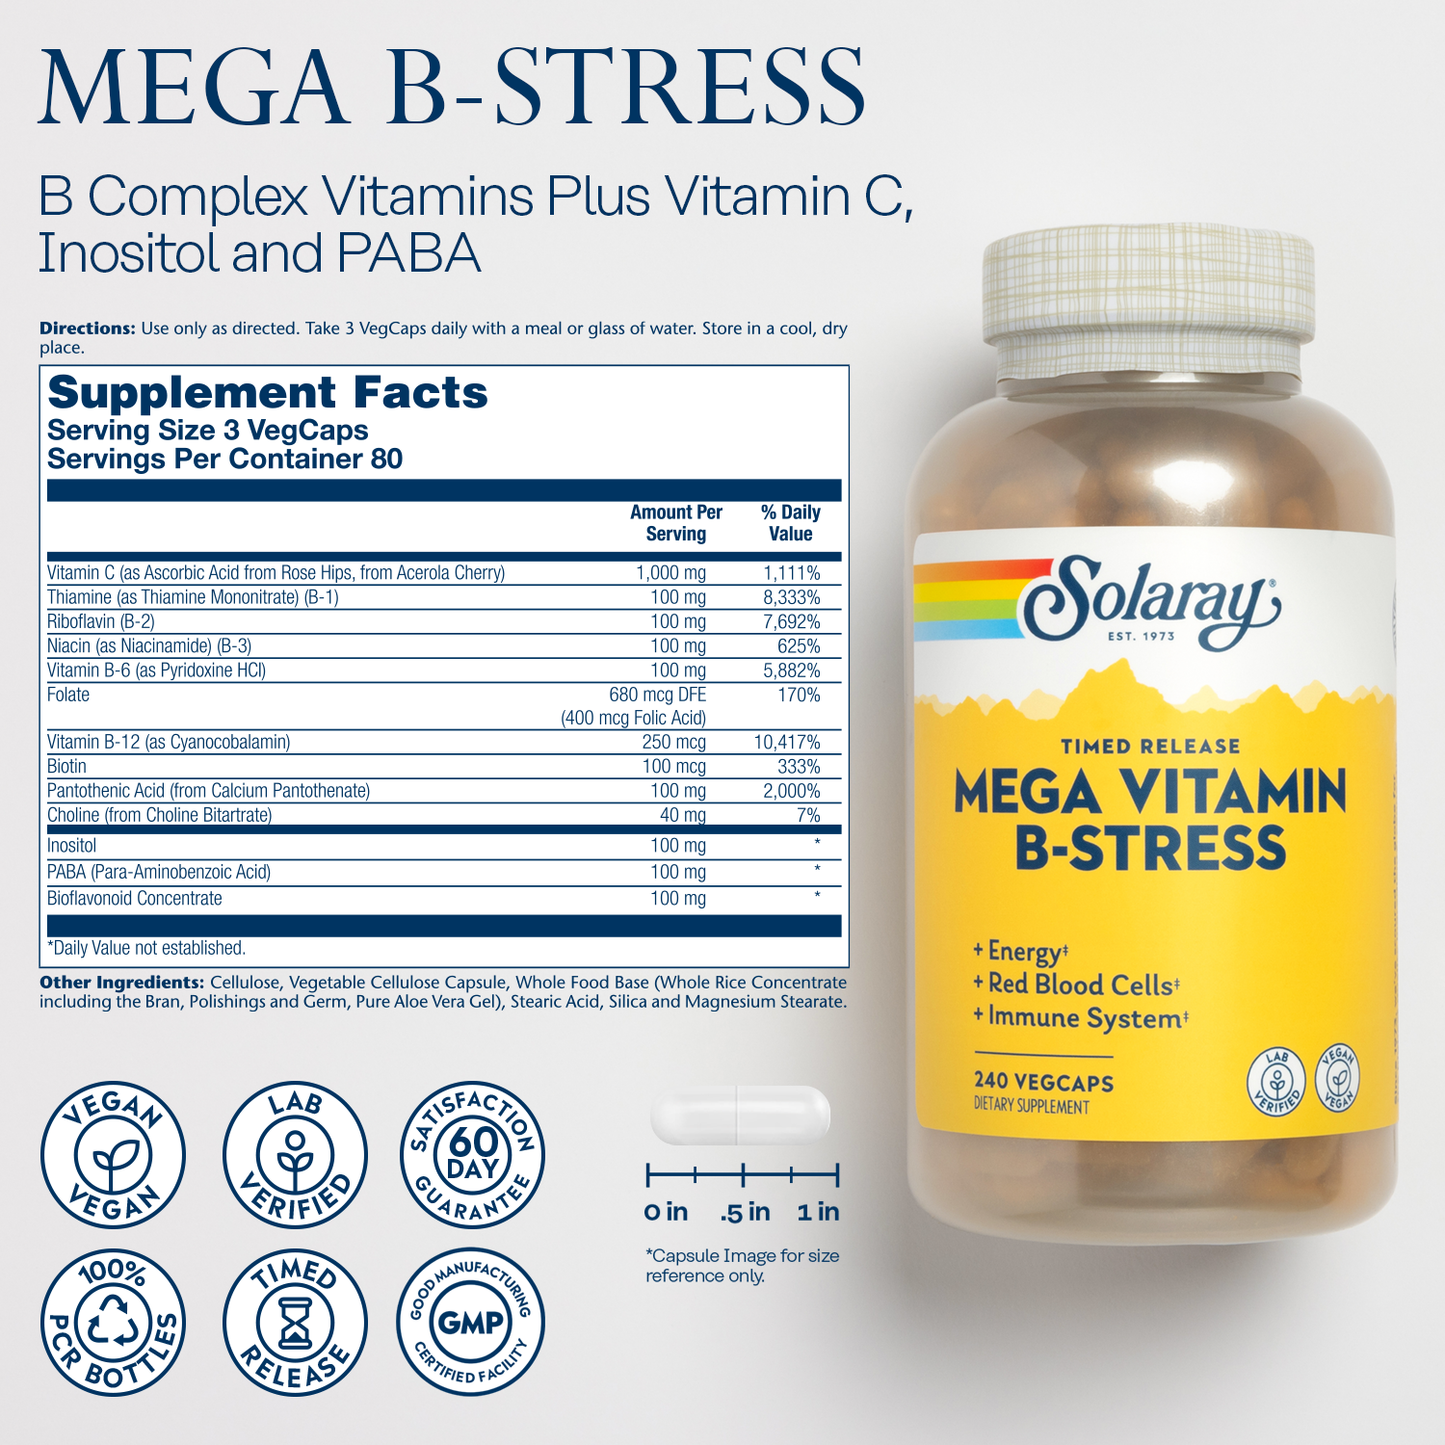 Solaray Mega Vitamin B-Stress, Timed-Release Vitamin B Complex with 1000 mg of Vitamin C for Stress, Energy, Red Blood Cell & Immune Support, Vegan, 60-Day Guarantee,  (240 CT)